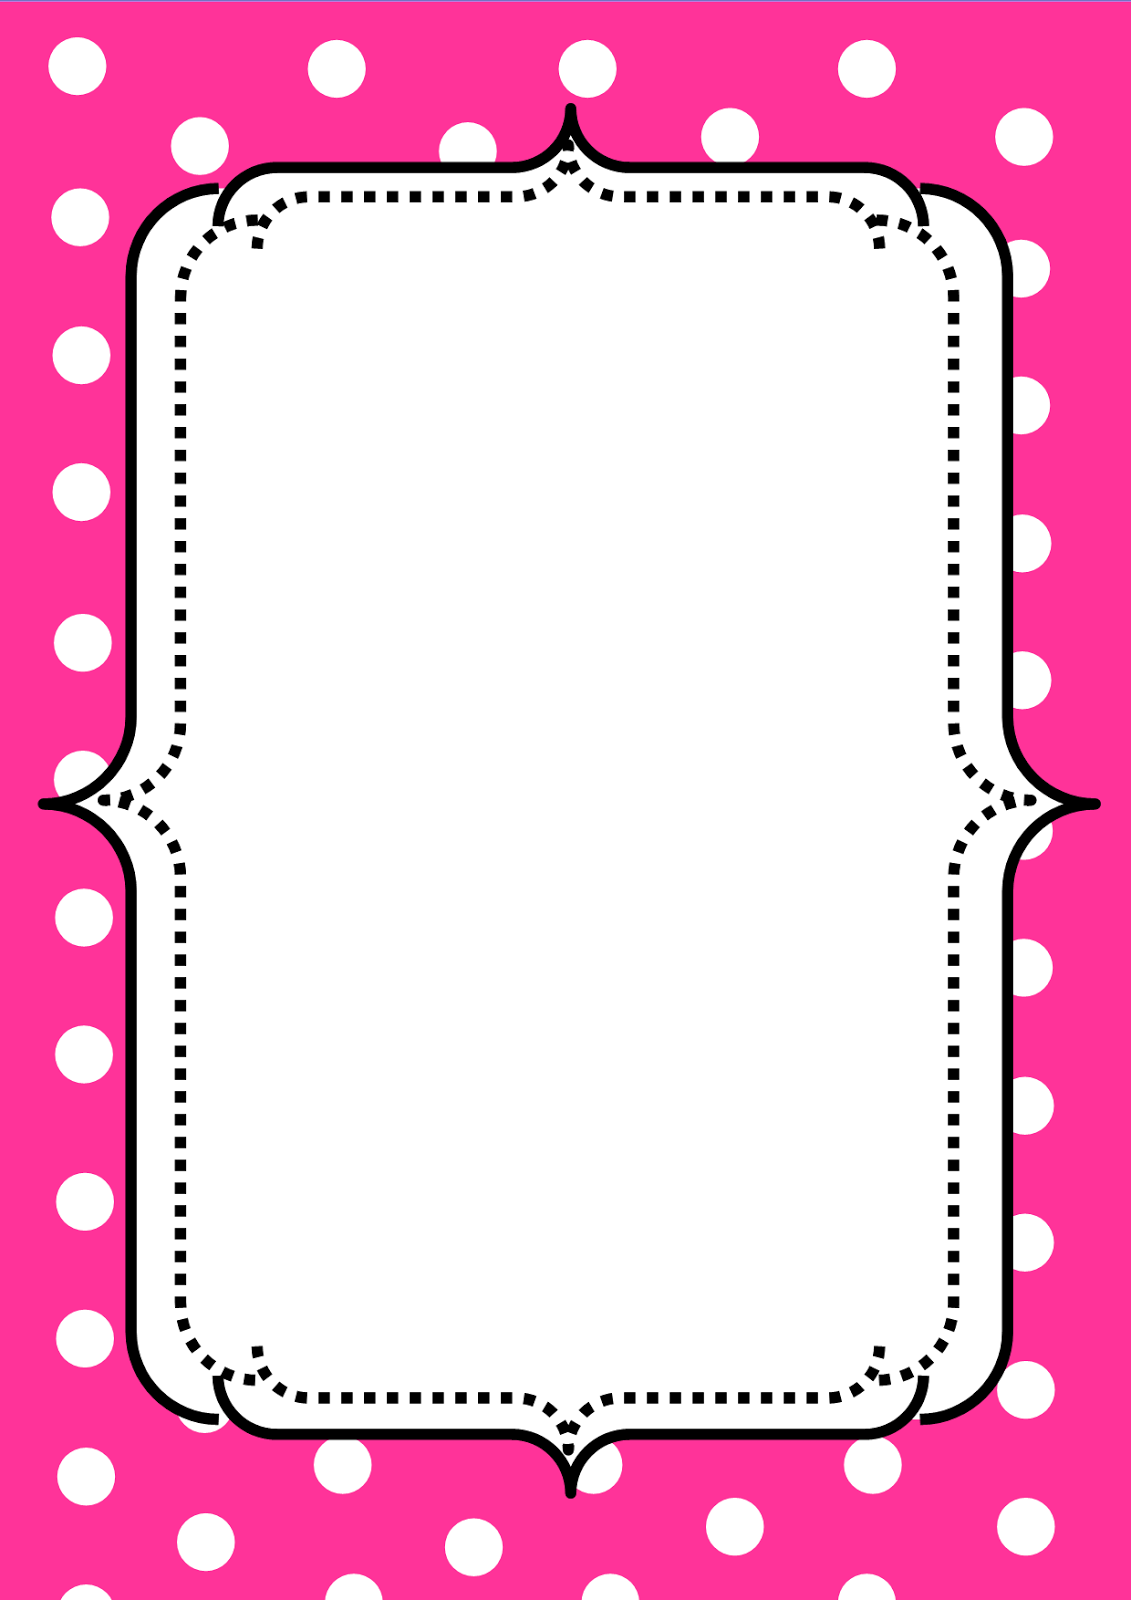 Clip Arts Related To : free clipart floral border. view all Pink Cliparts B...